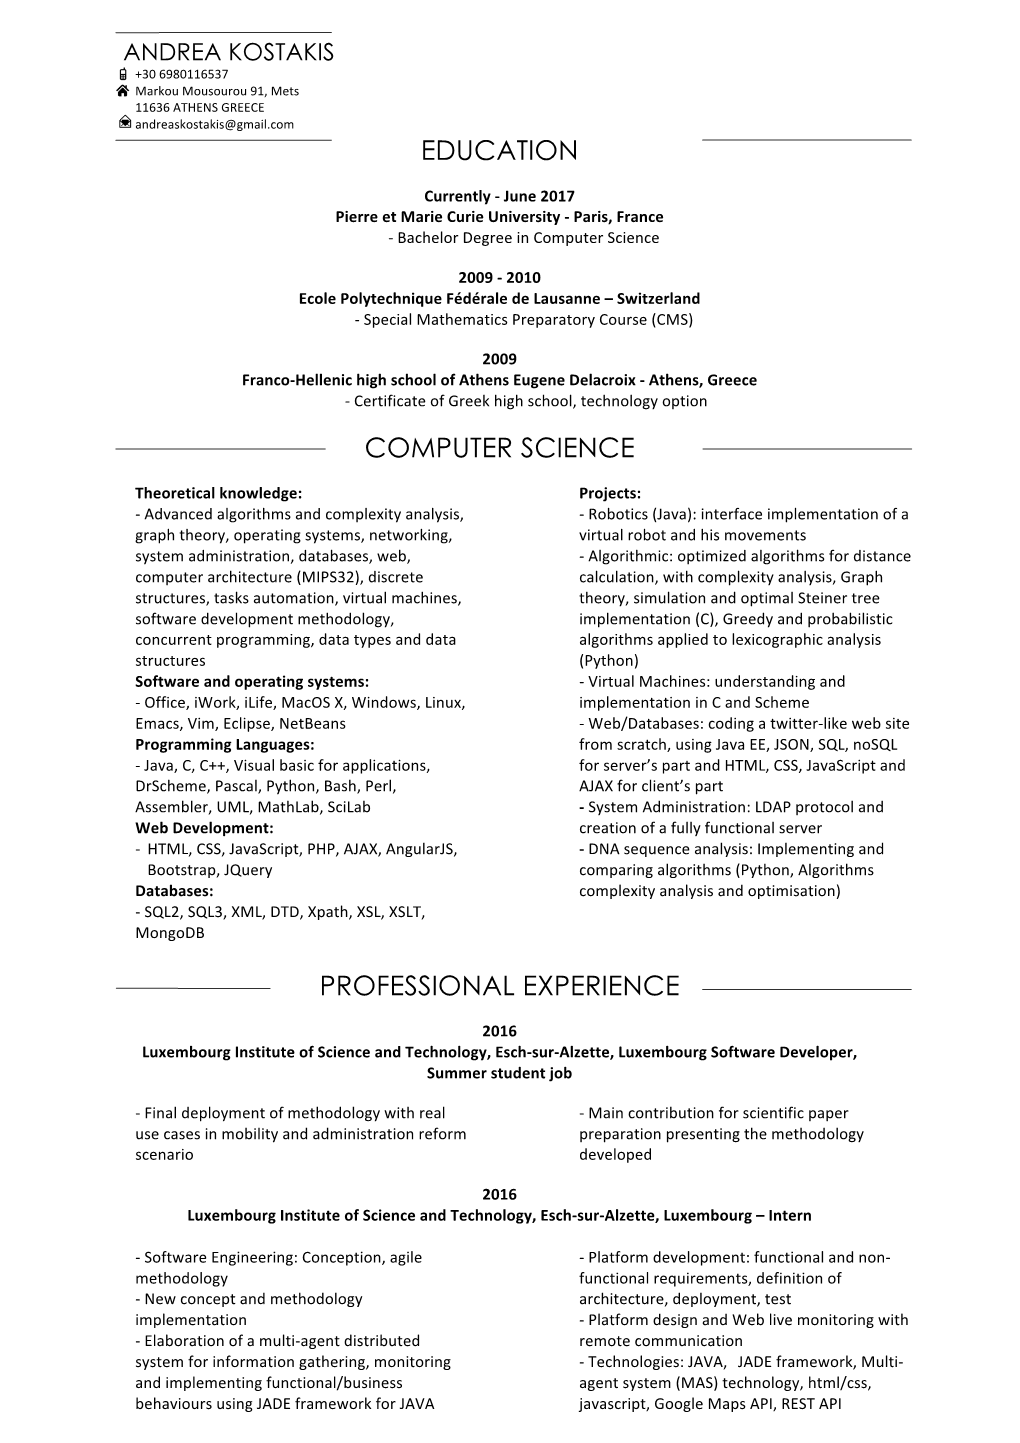 Education Computer Science Professional Experience